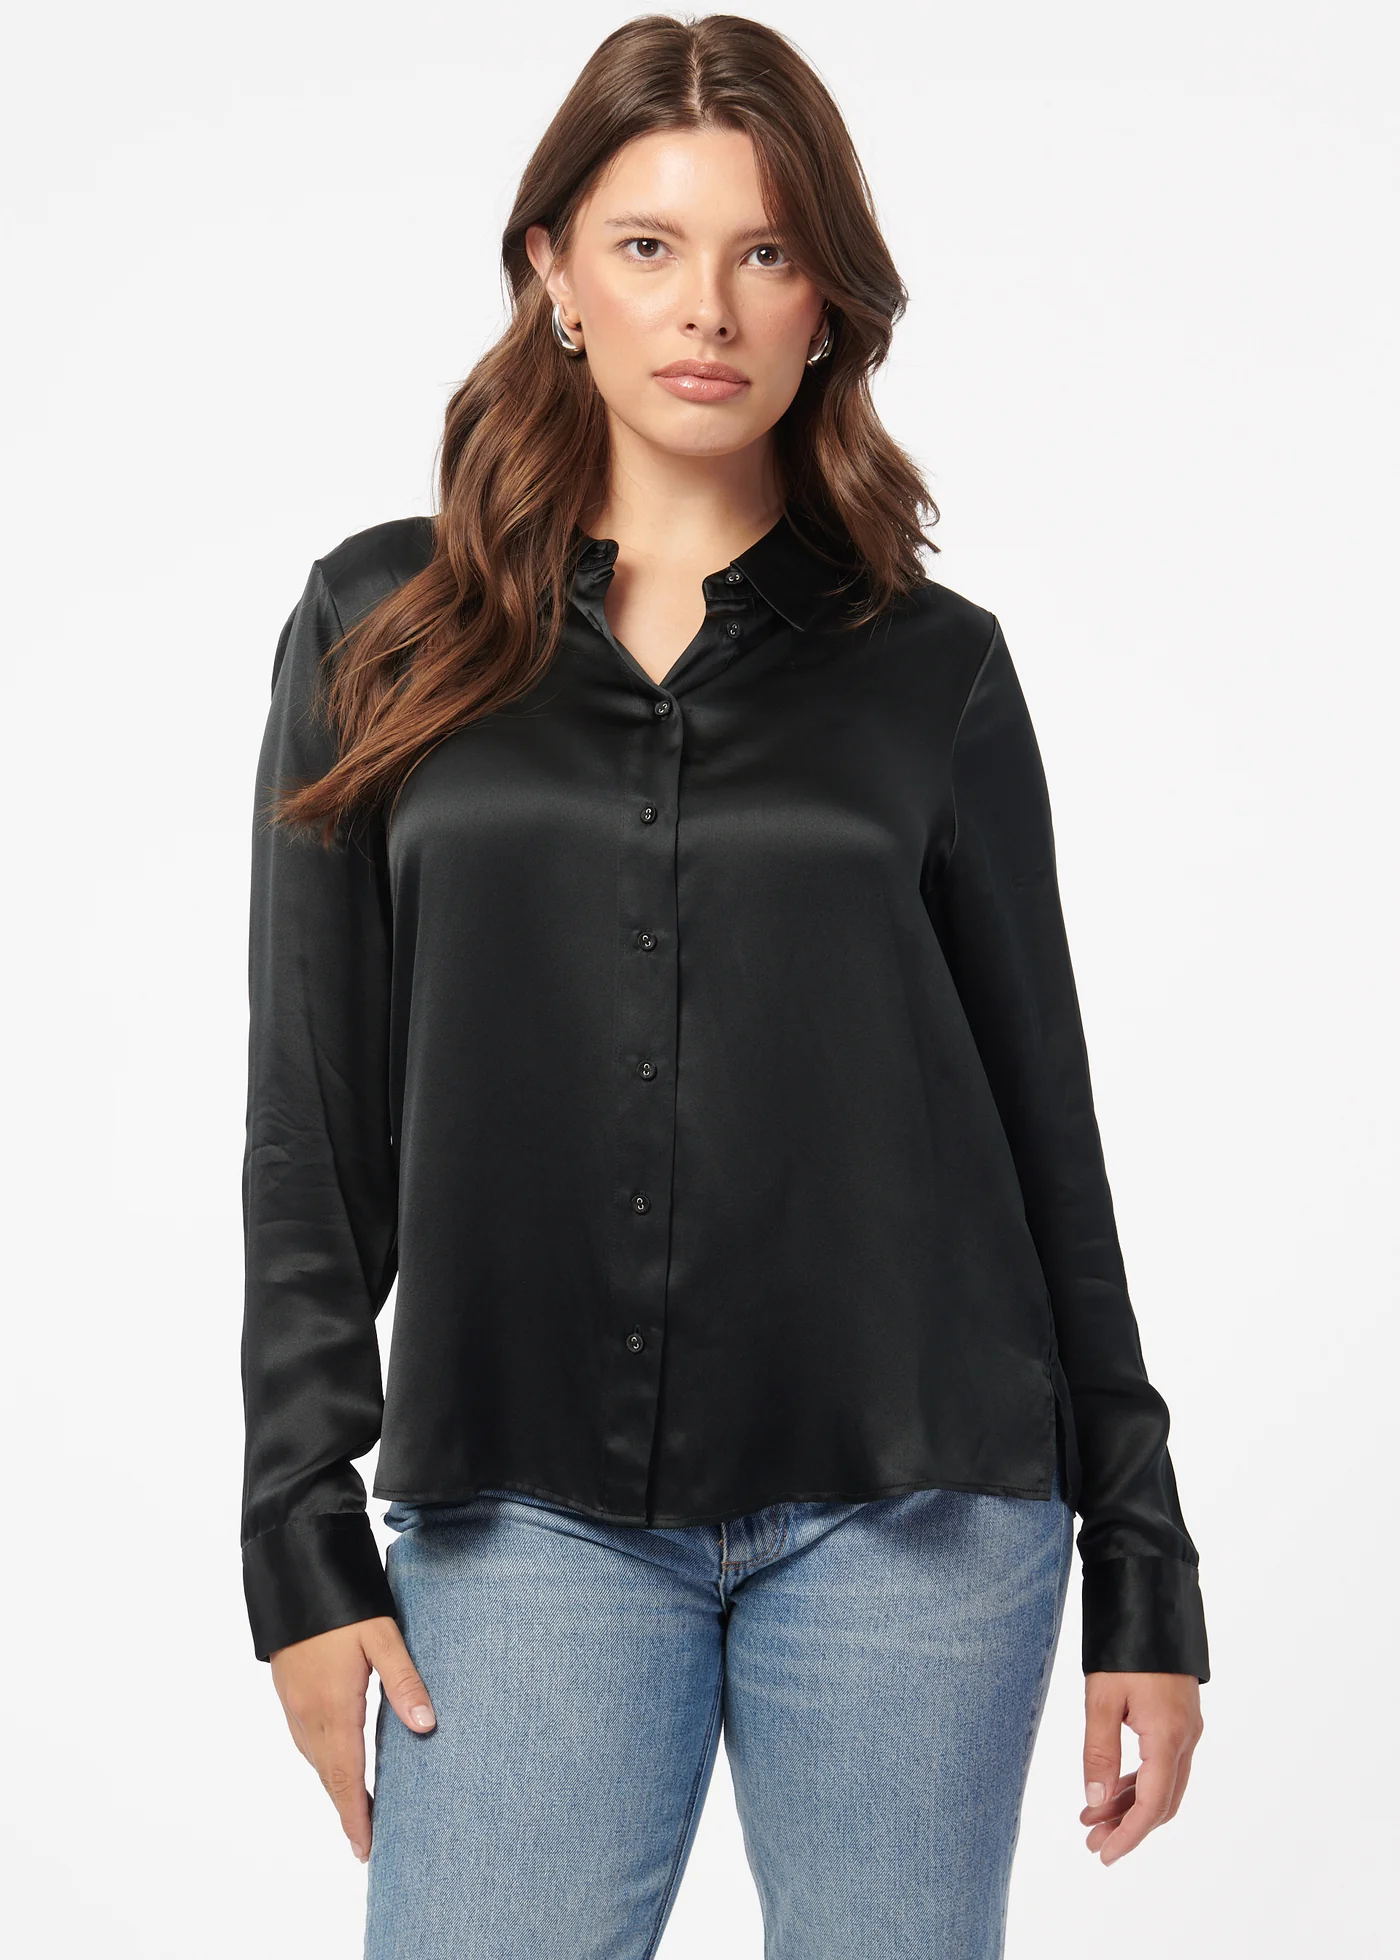 CROSBY BLOUSE IN BLACK - Romi Boutique